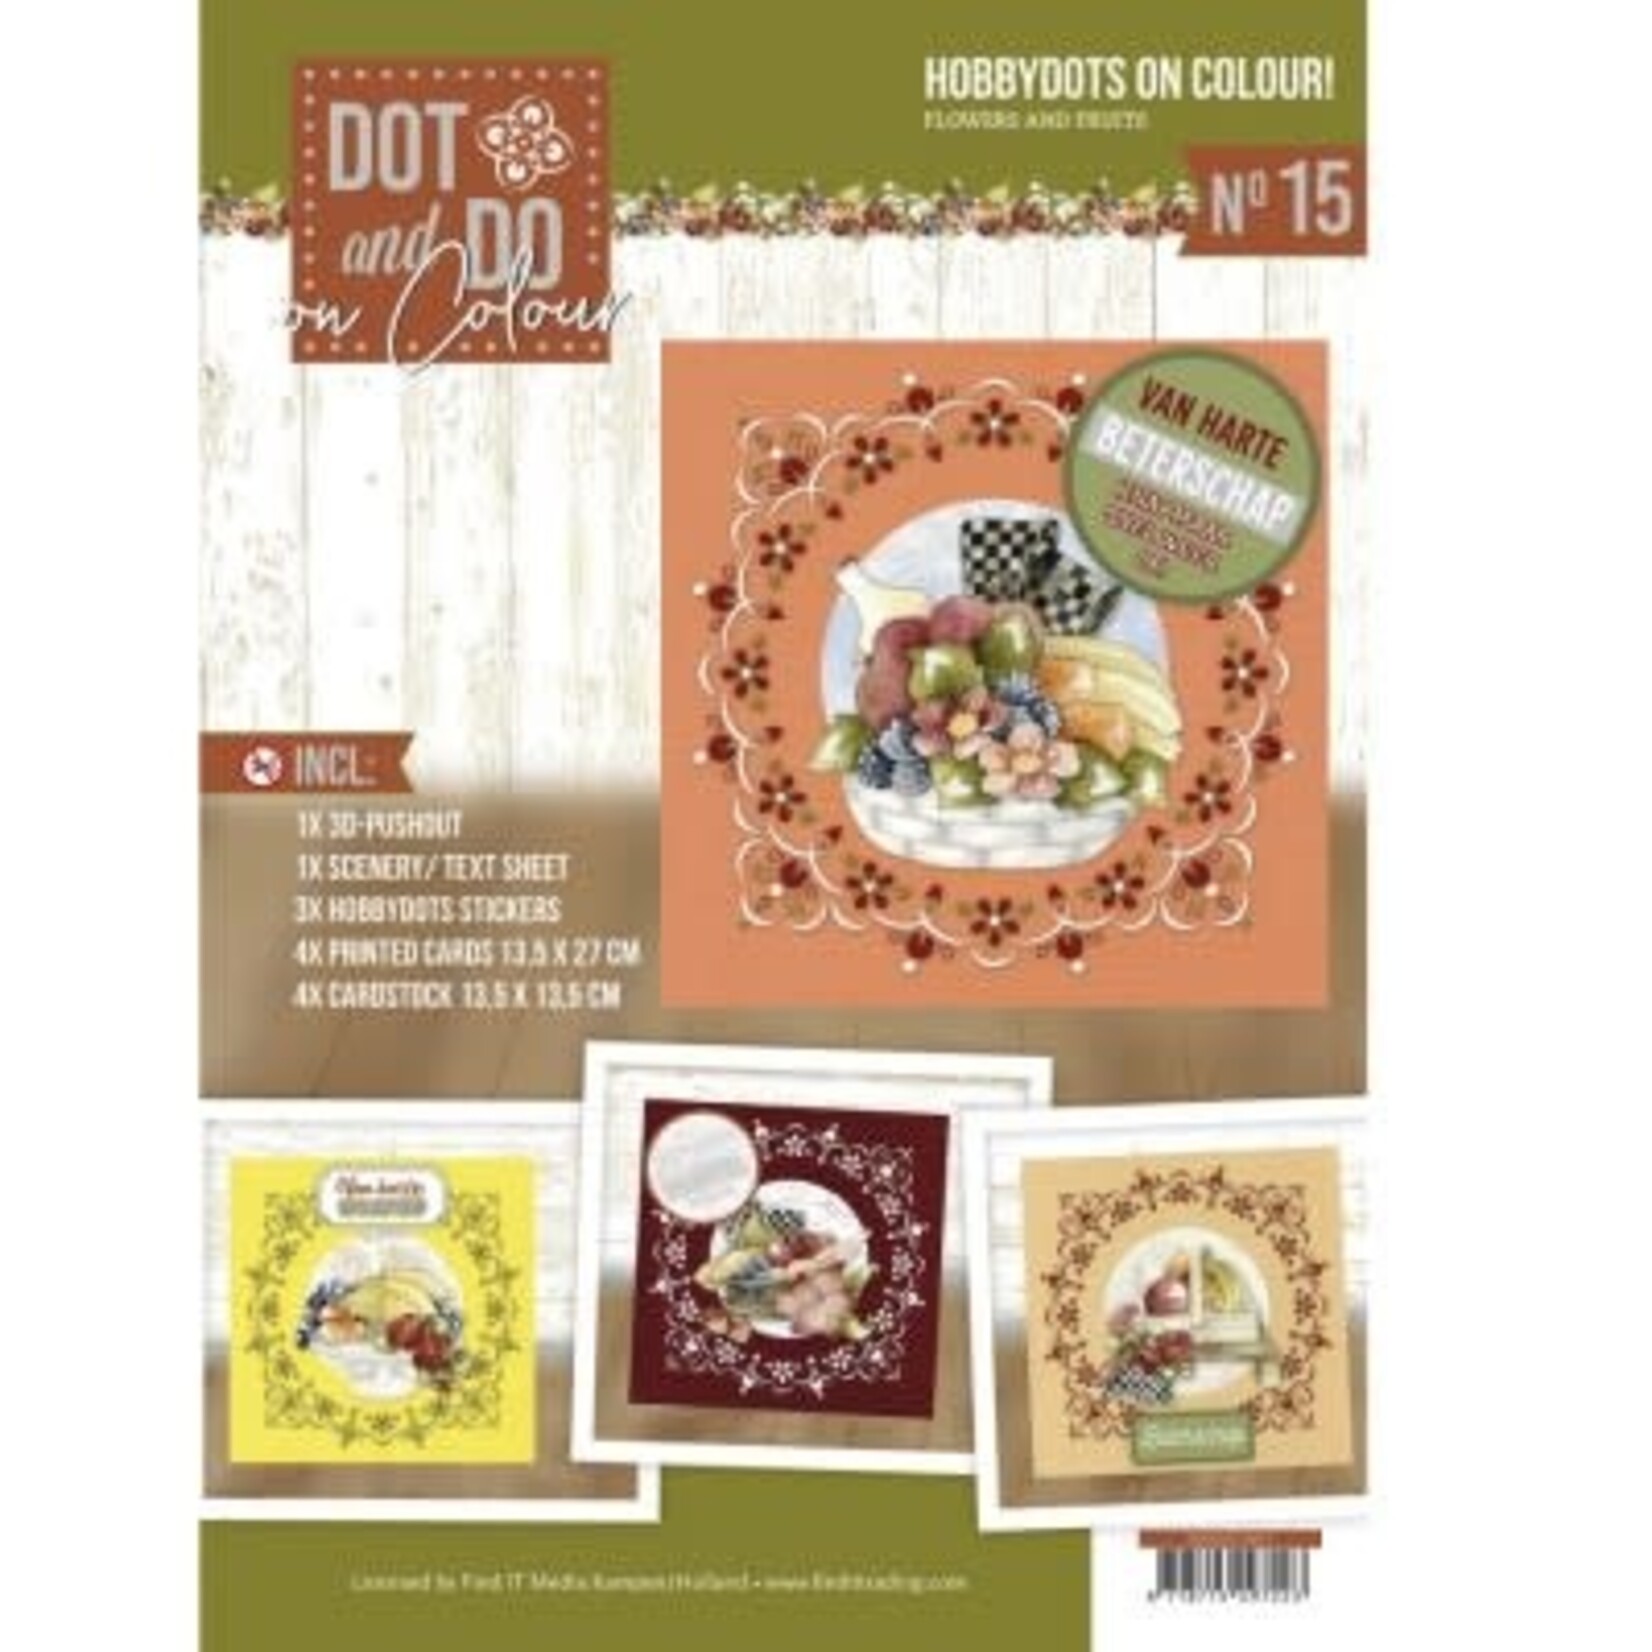 Hobbydots Dot and Do on Colour 15 - Precious Marieke - Flowers and Fruits